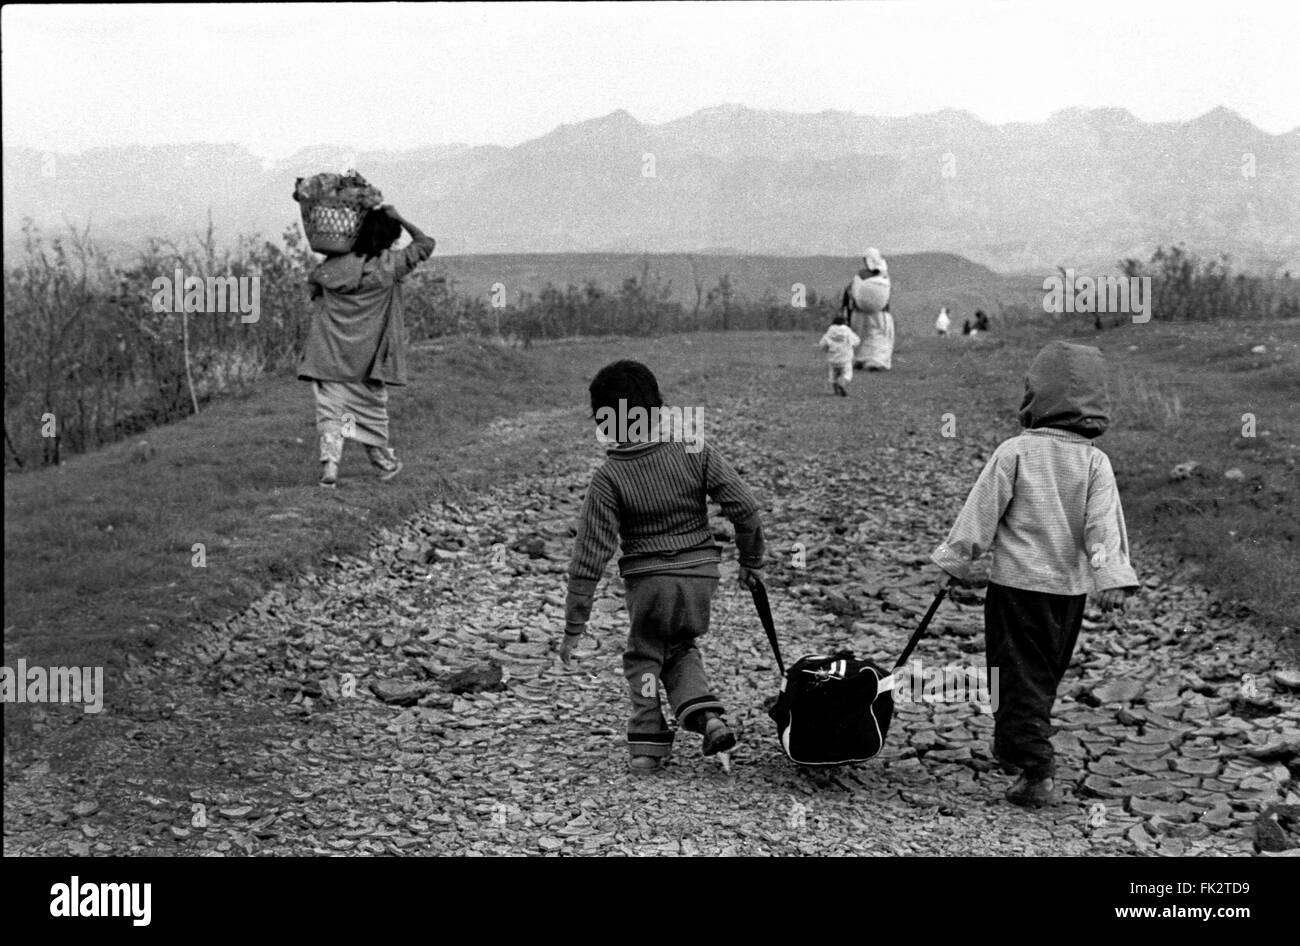 Near Zakho, northern Iraq, Kurdistan. April 1991.Kurdish children and families carry their belongings towards mountains which mark the border with Turkey. They were escaping as refugees after  the failed uprising by Kurds against forces of Saddam Hussein's government. Stock Photo